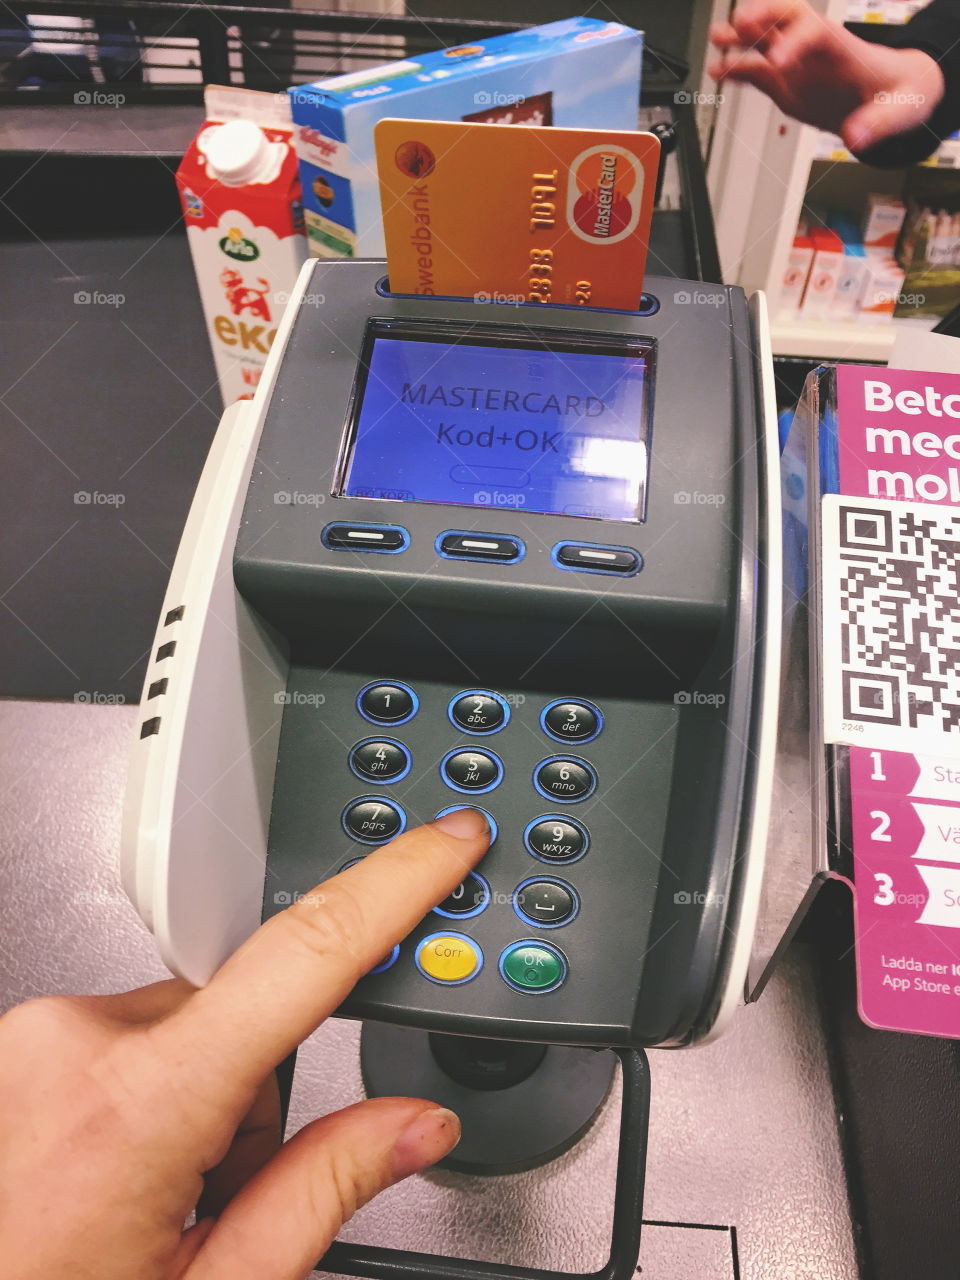 Paying with the card